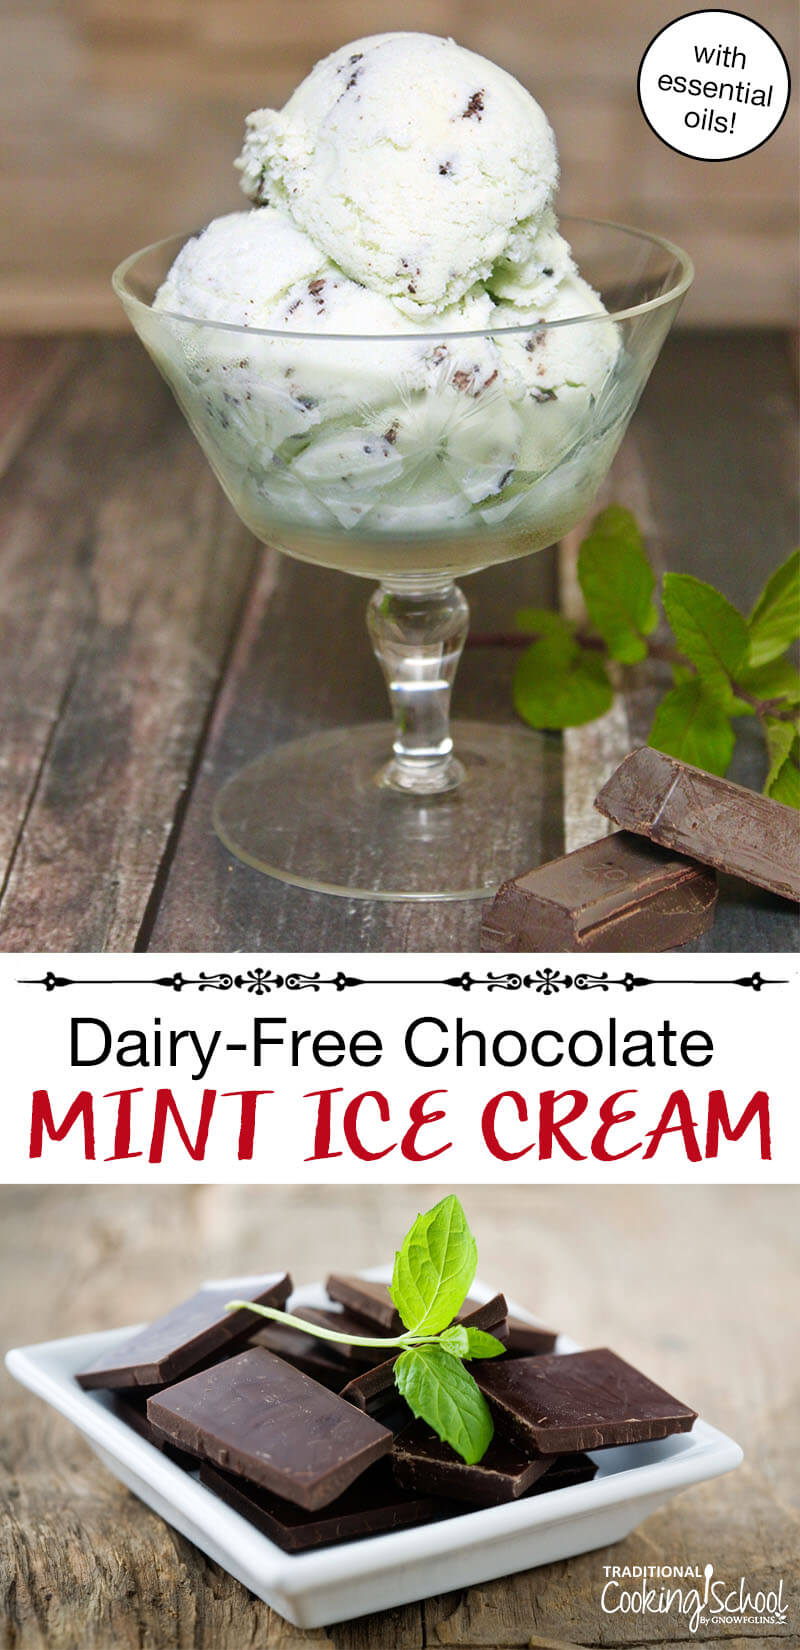 Pinterest Pin with two images. The top image is of a glass bowl filled with mint chip ice cream. The bottom image is of a plate of chocolate pieces with a sprig of mint. Text overlay says, "Dairy-Free Chocolate Mint Ice Cream - with essential oils!"